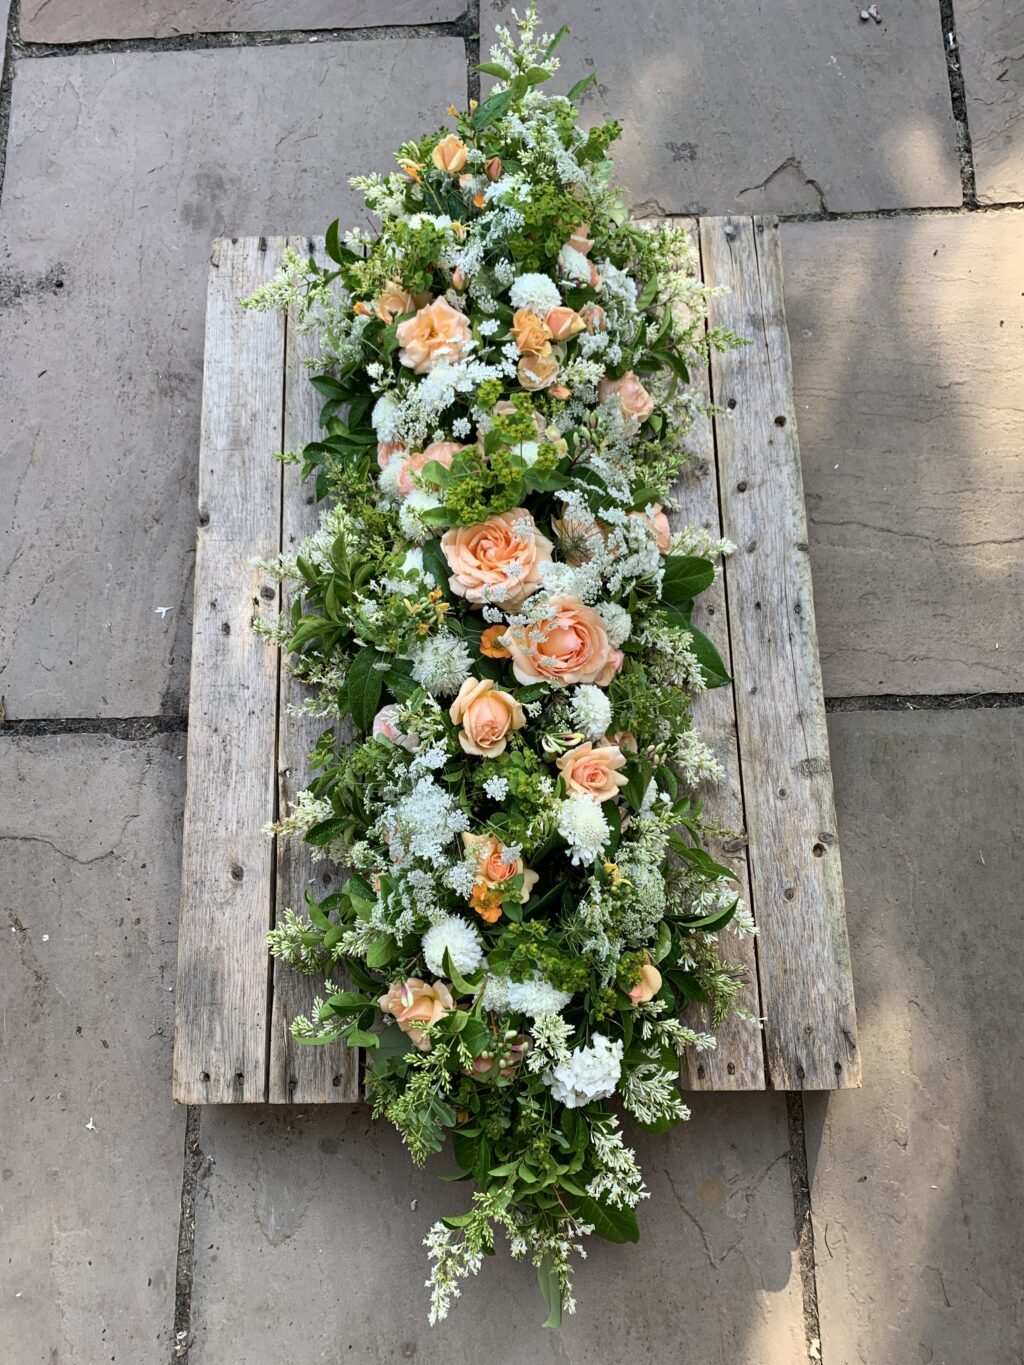 A seasonal casket arrangement of British flowers designed by The Posy Patch